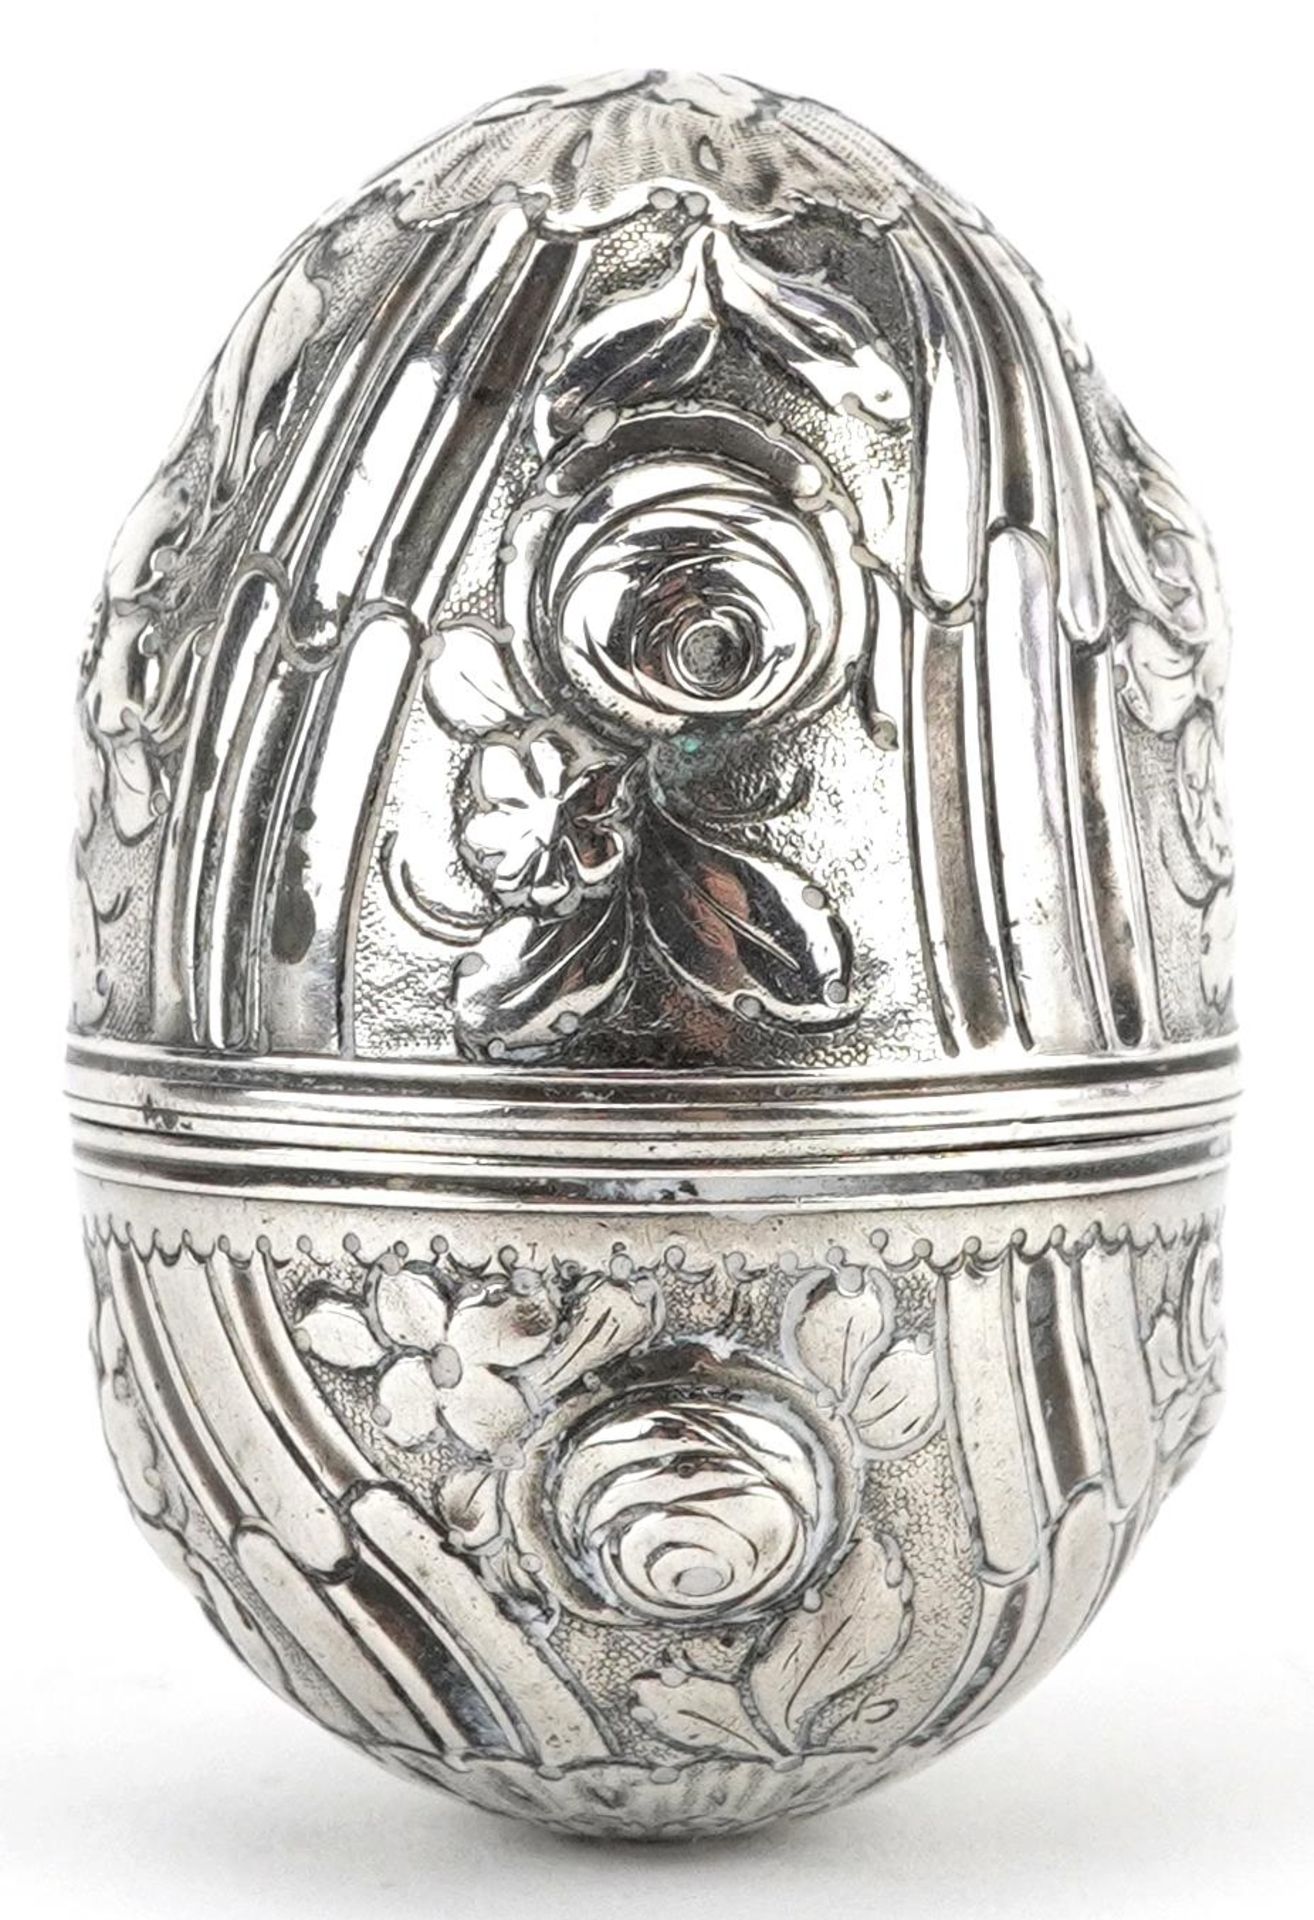 Unmarked silver trinket box in the form of an egg embossed with flowers and foliage, 5cm high, 15.4g